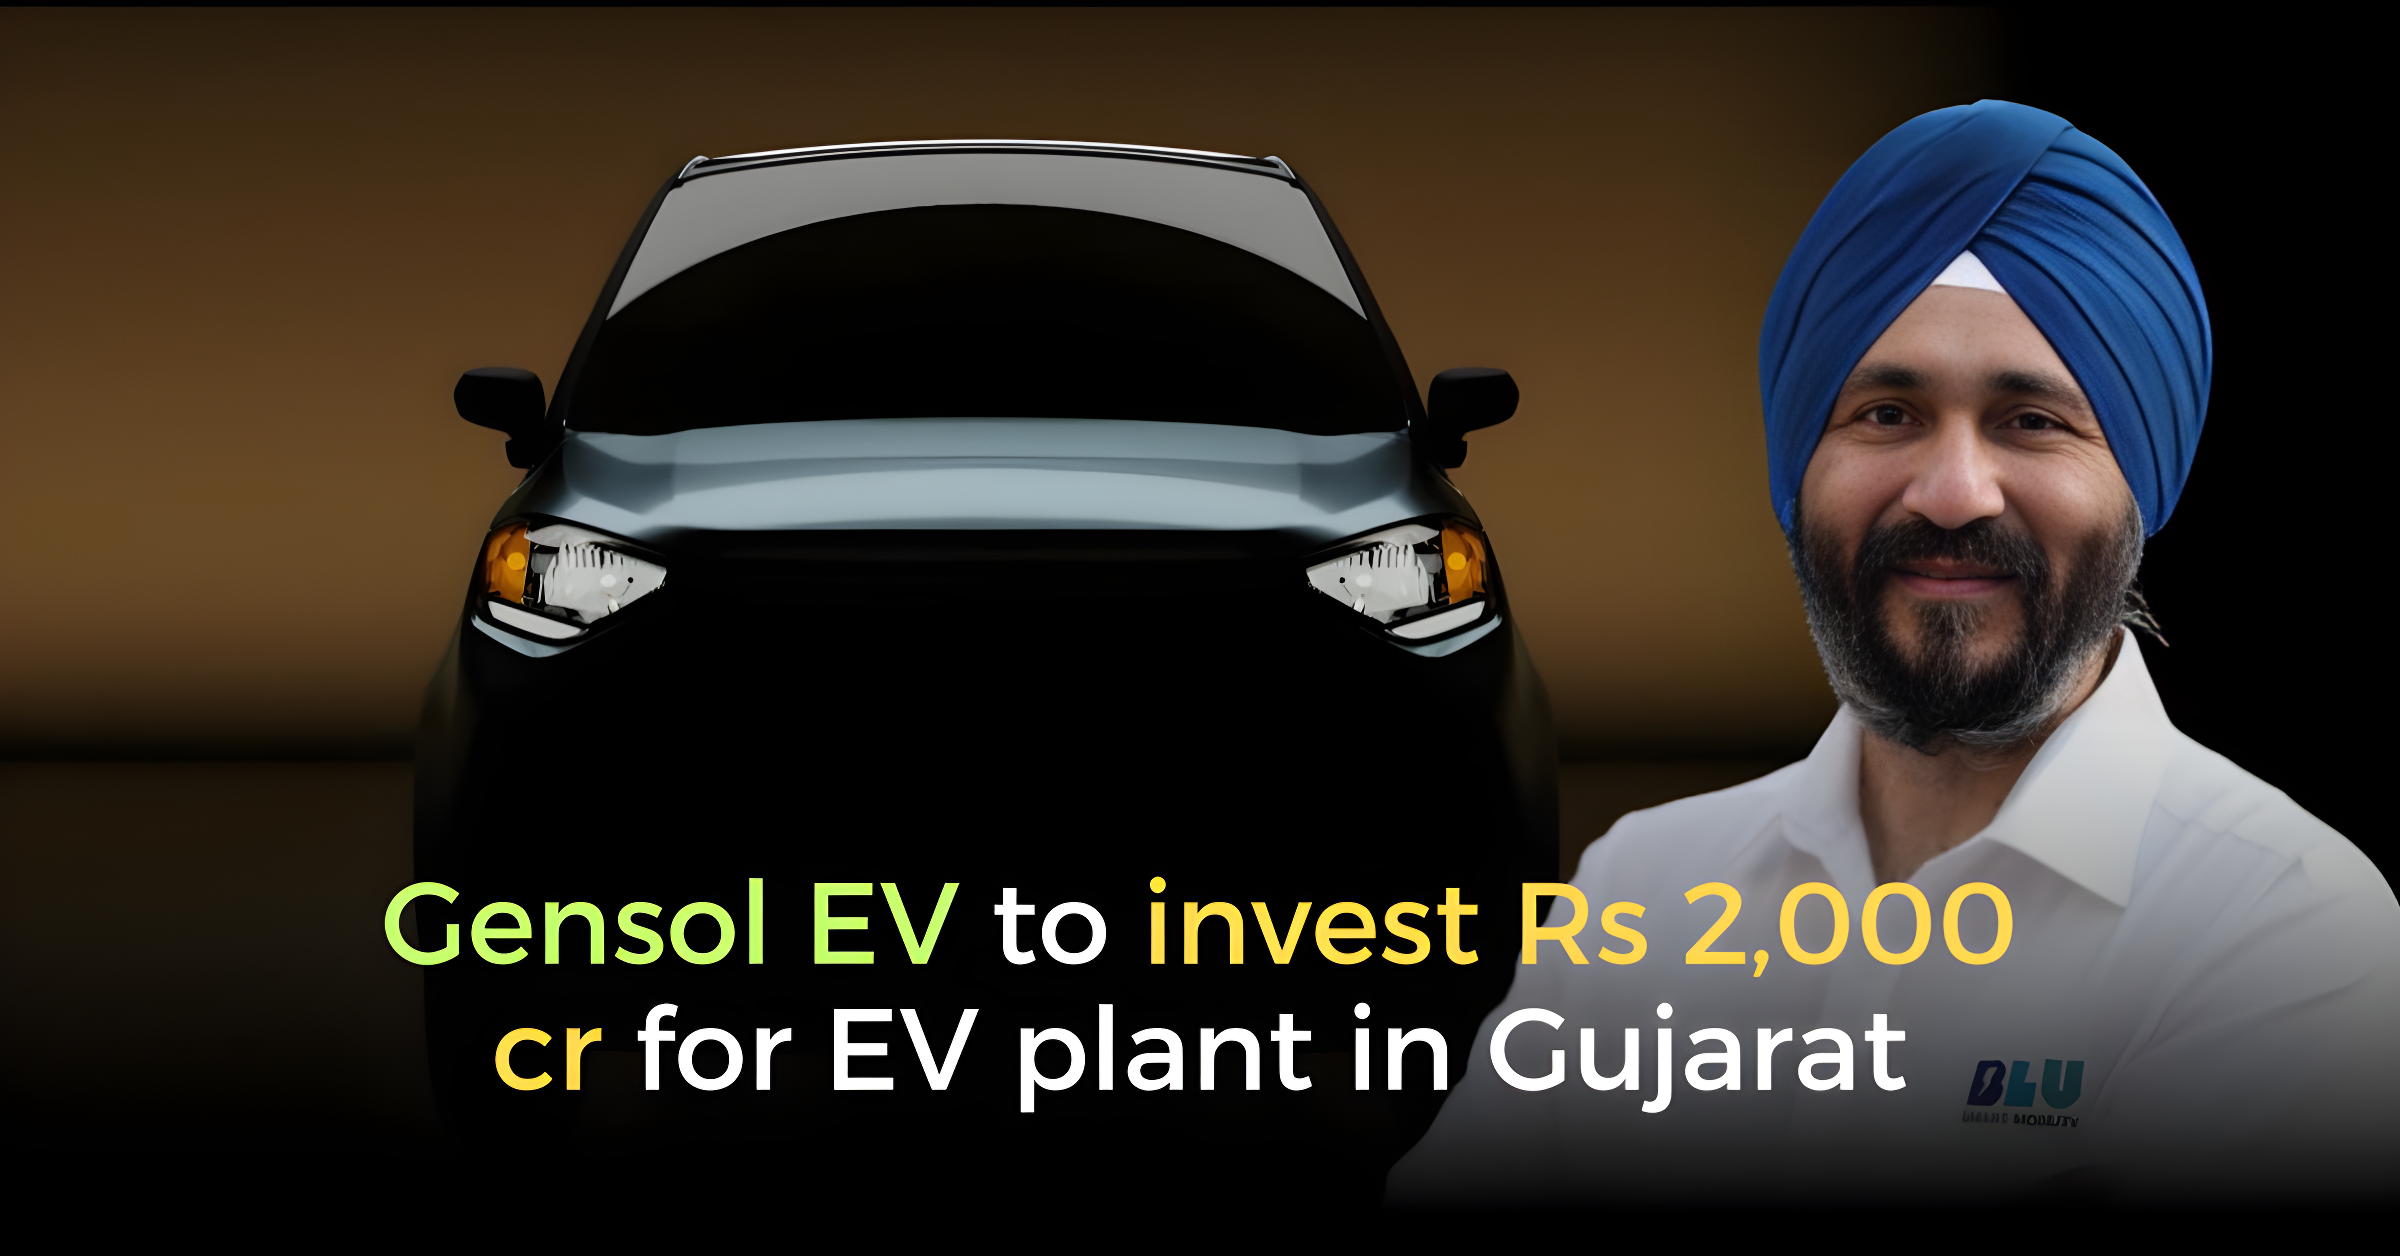 https://e-vehicleinfo.com/gensol-engineering-to-invest-%e2%82%b92000-crore-in-gujarat-for-ev-manufacturing-plant/